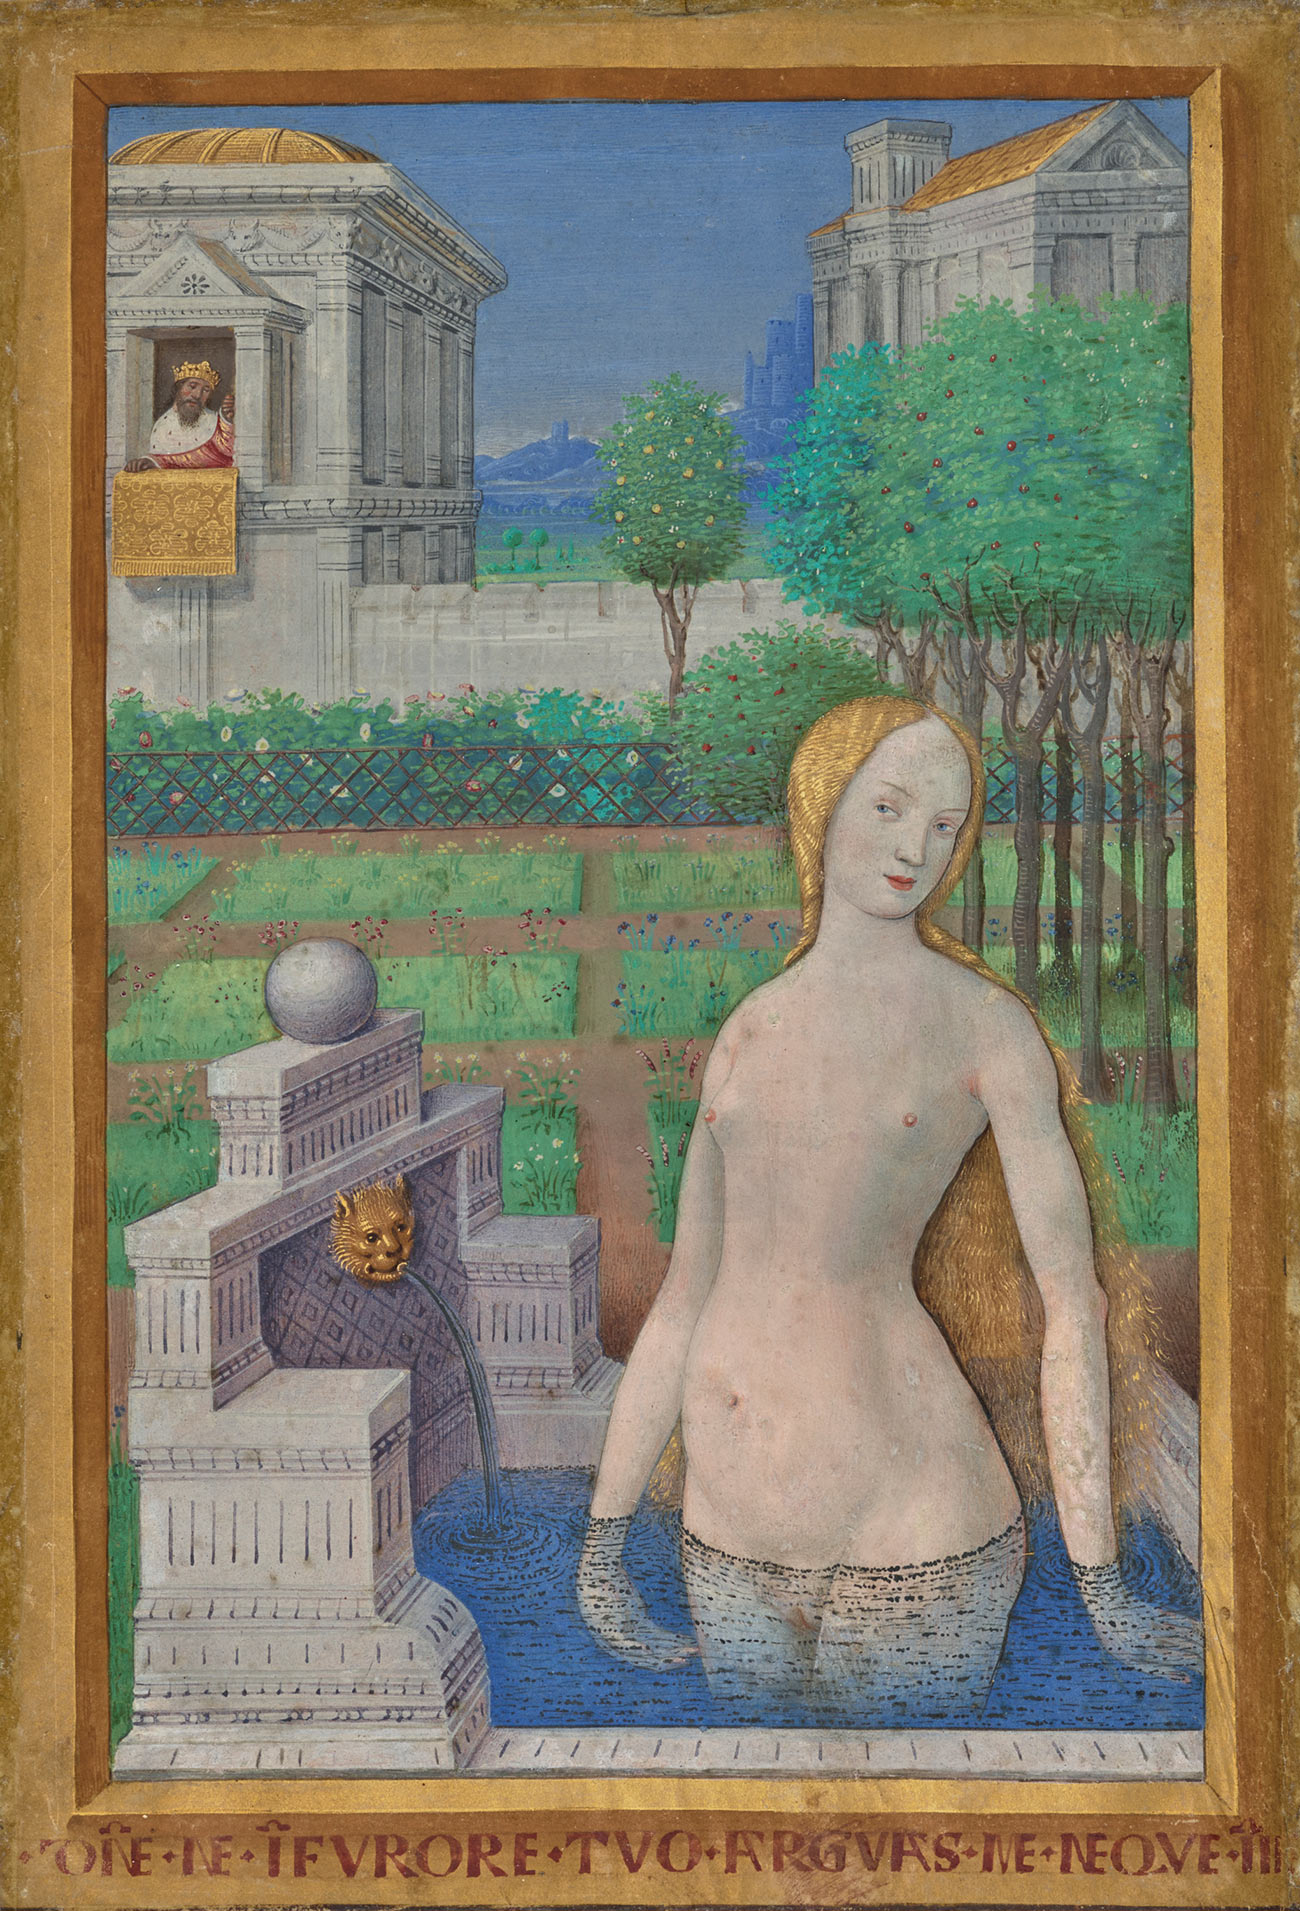 Sex, Power, and Violence in the Renaissance Nude picture image photo